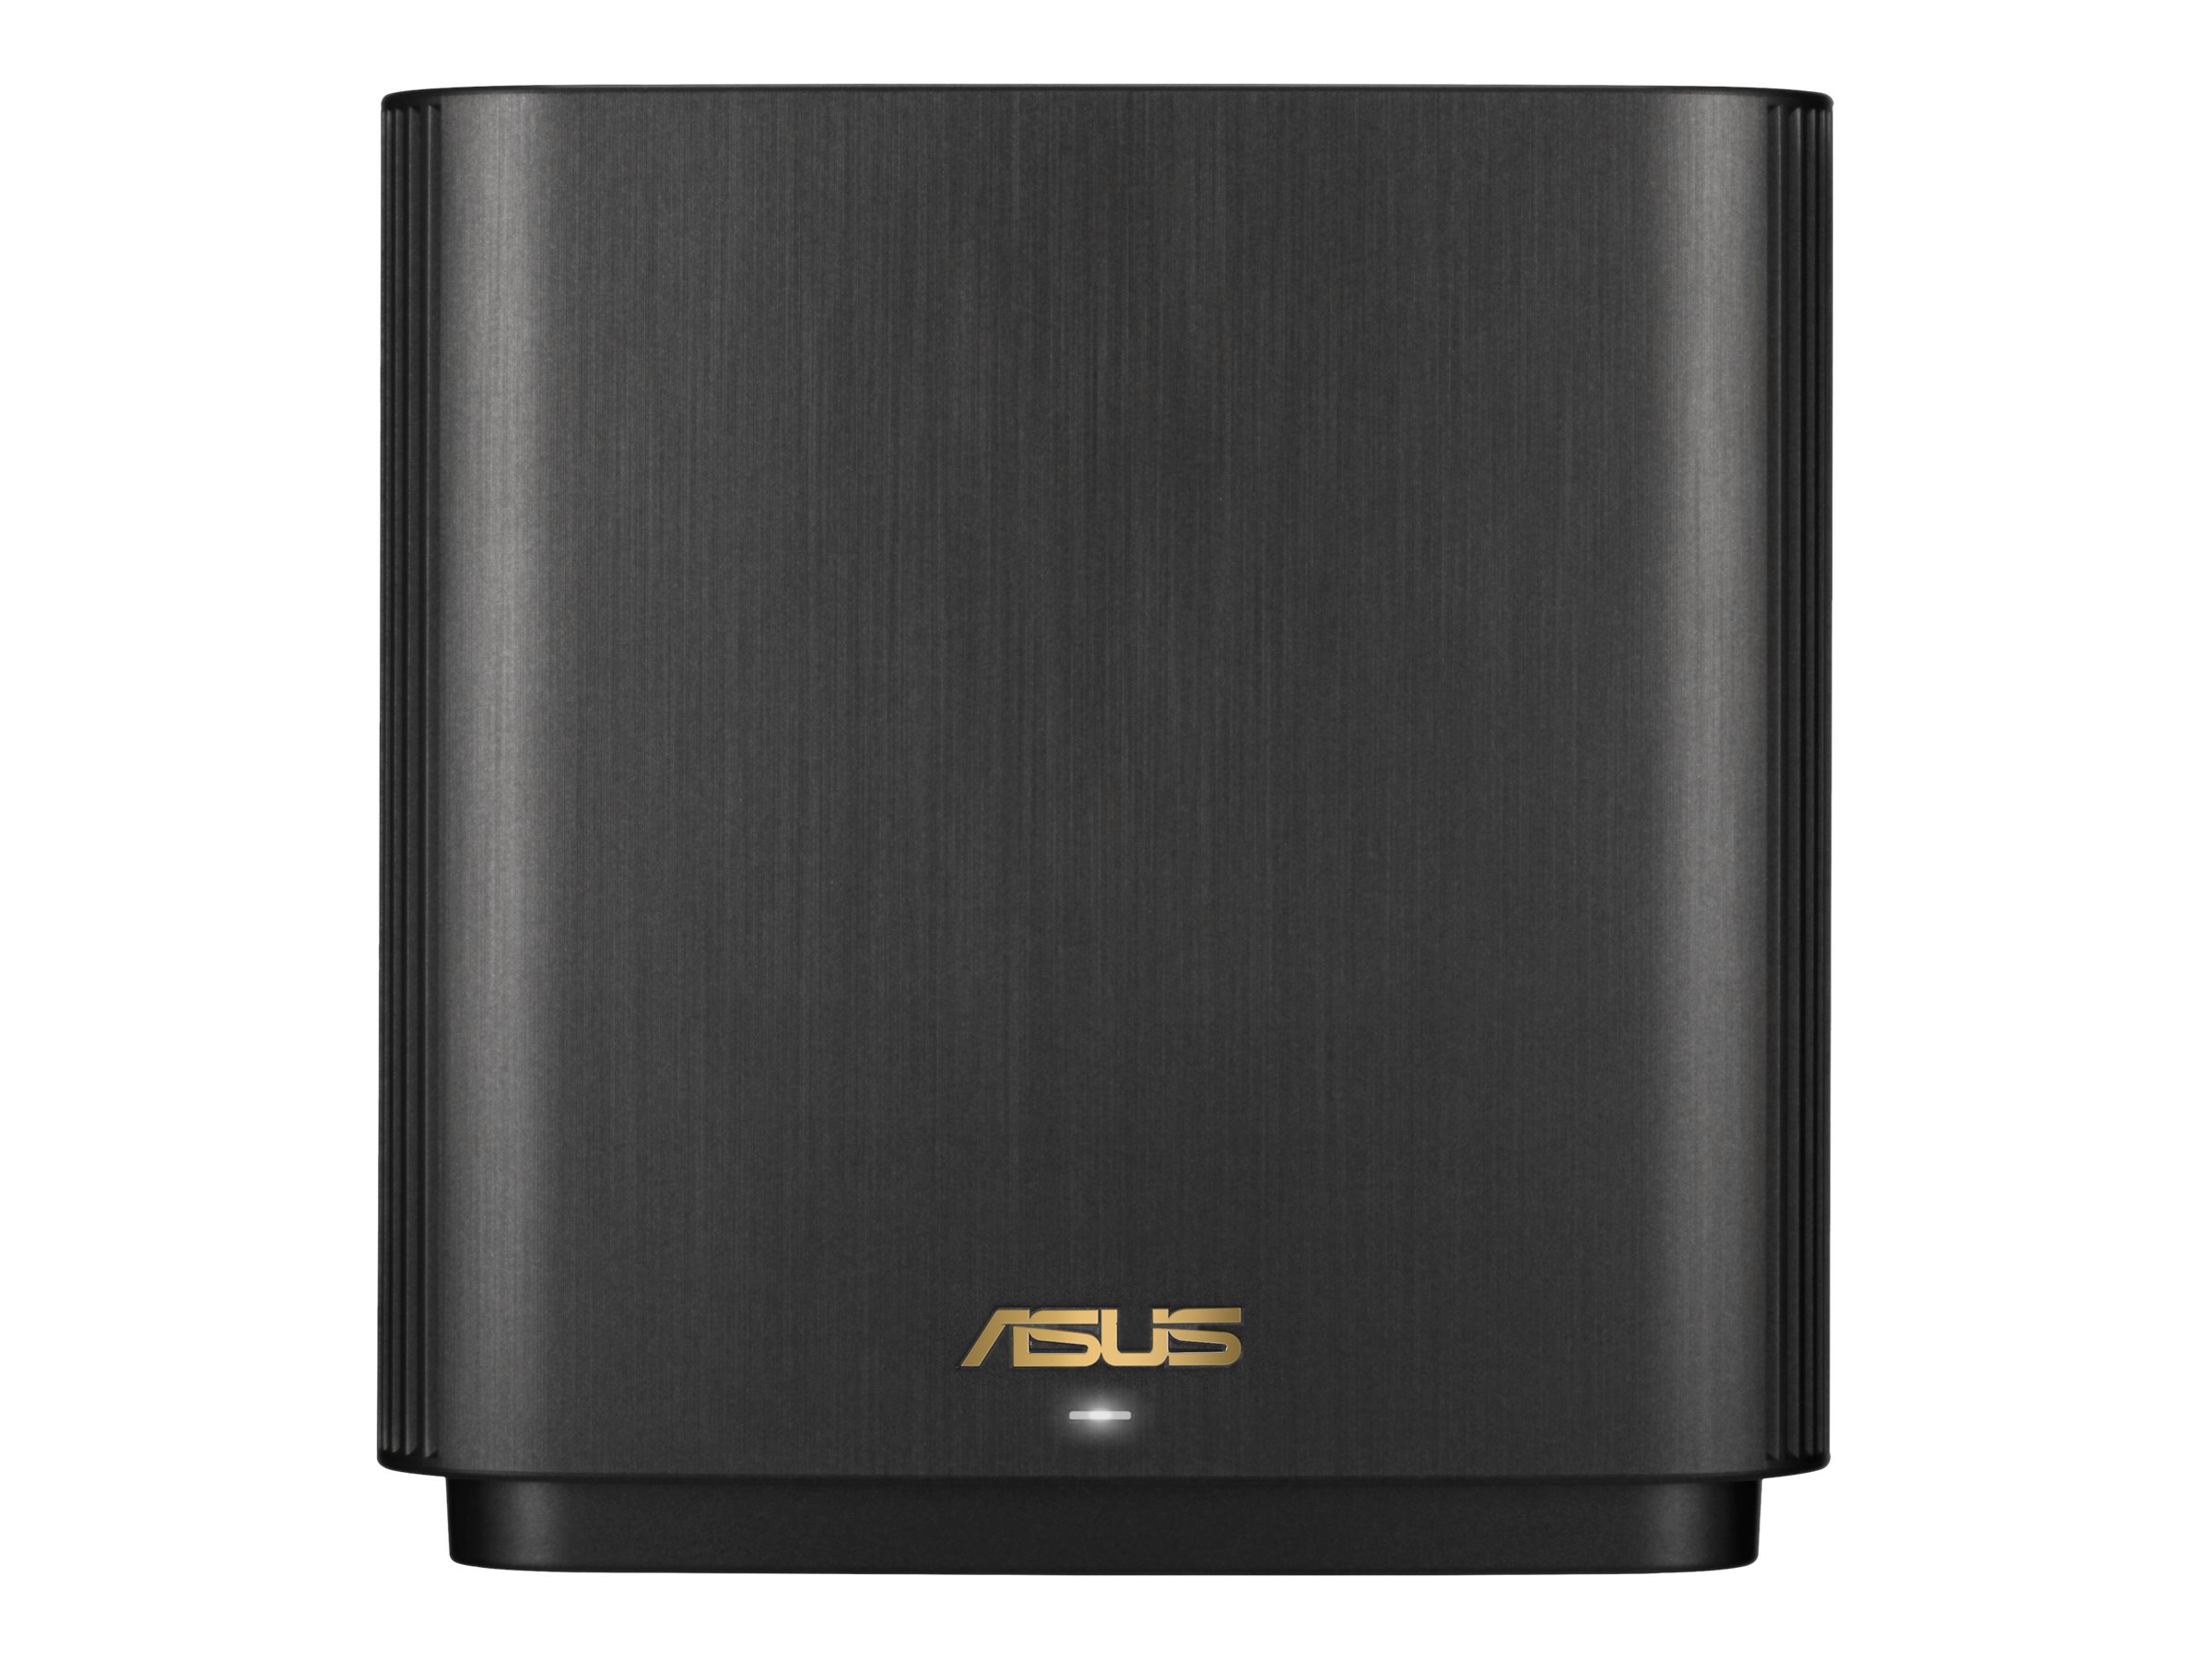 ASUS ZenWiFi XT9 - Router - 3-Port-Switch - GigE, 2.5 GigE - Wi-Fi 6 - Tri-Band